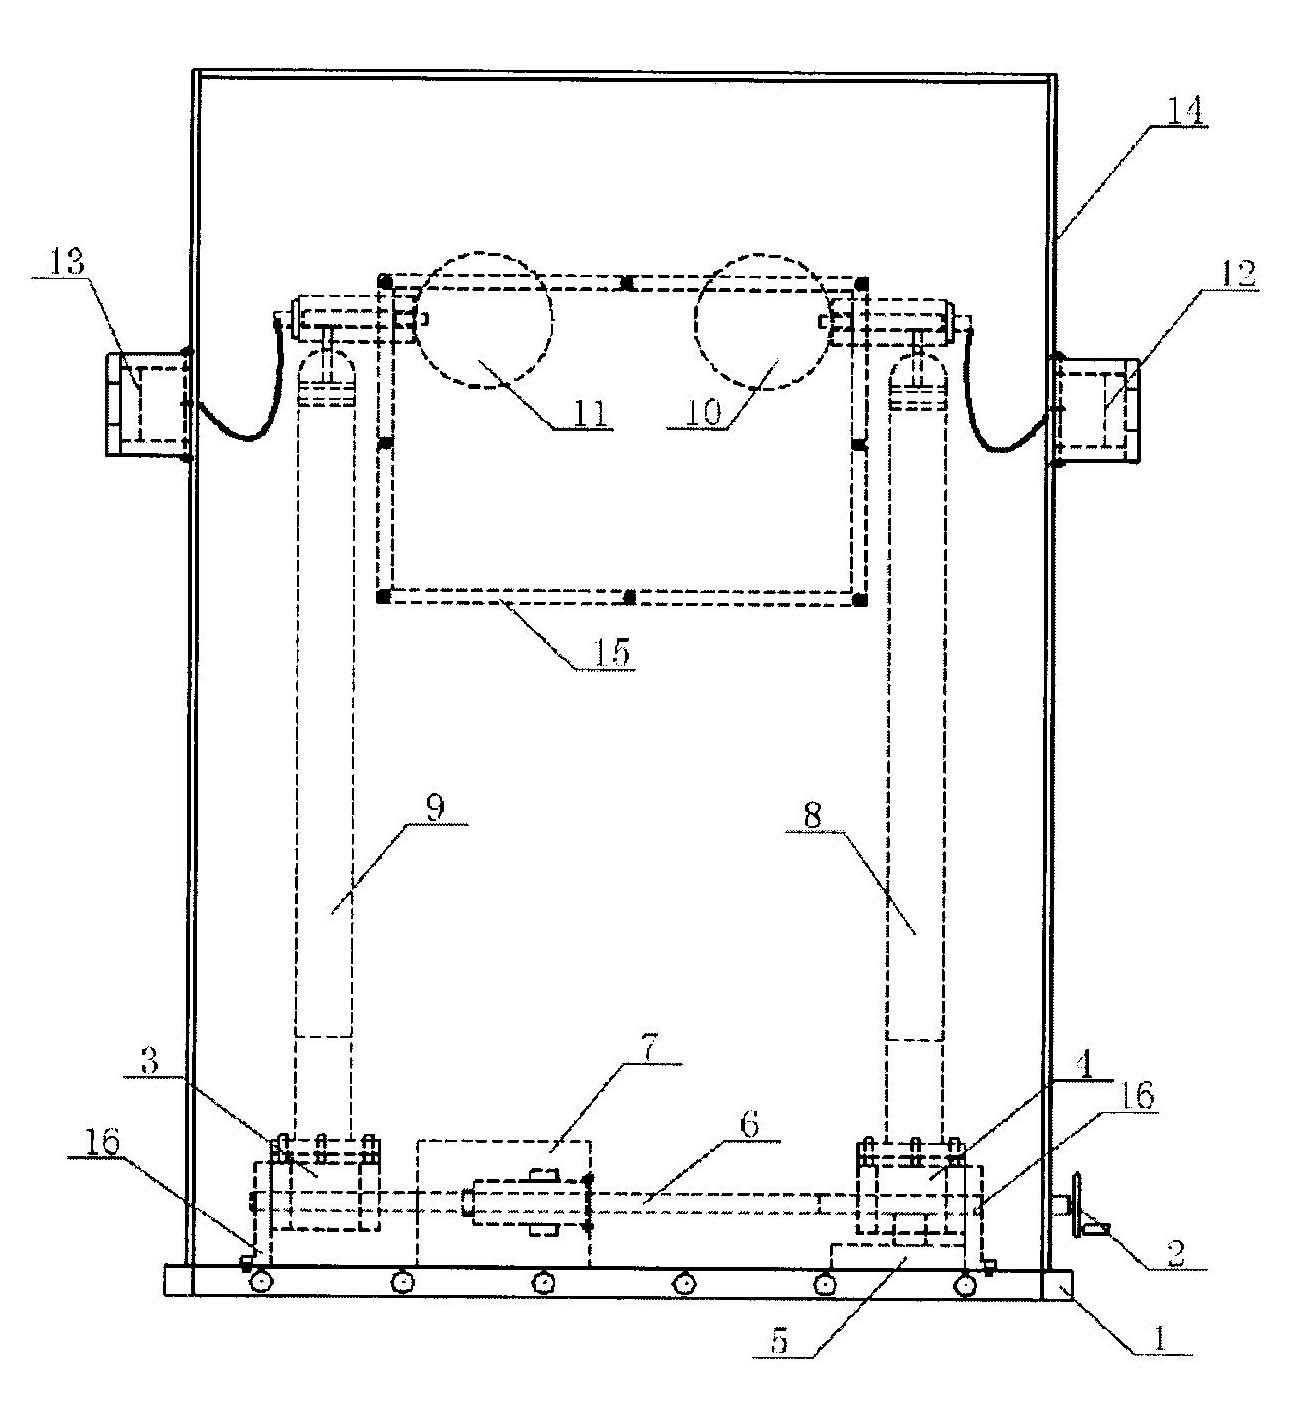 High-voltage large-current transient automatic discharge switch capable of presetting gaps